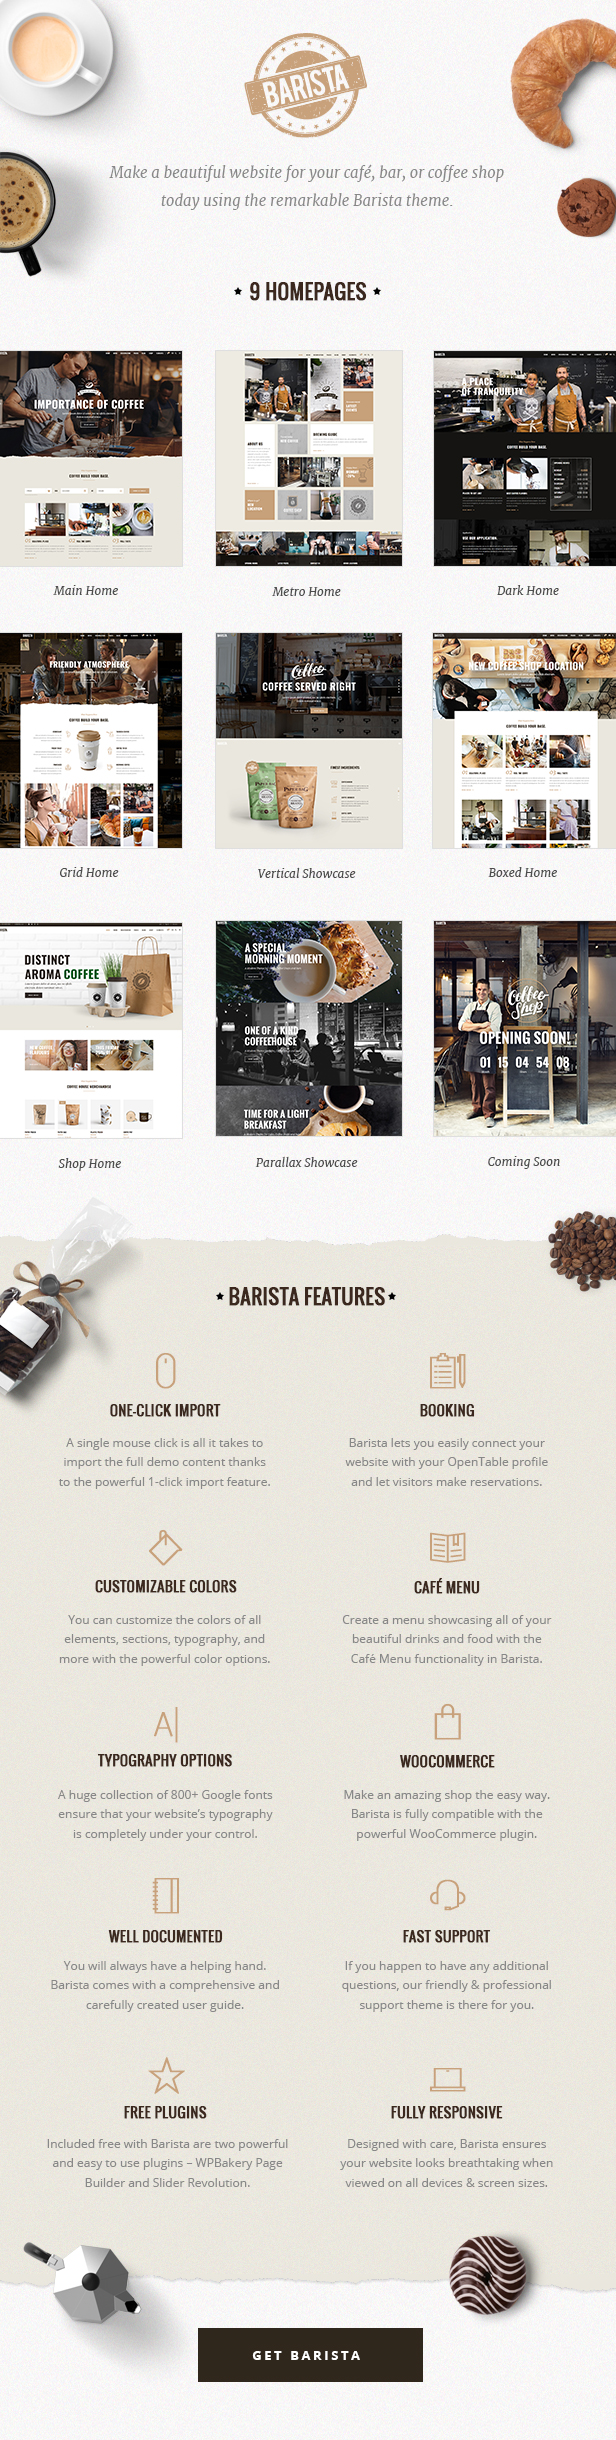 Barista - Modern Theme for Cafes, Coffee Shops and Bars - 1